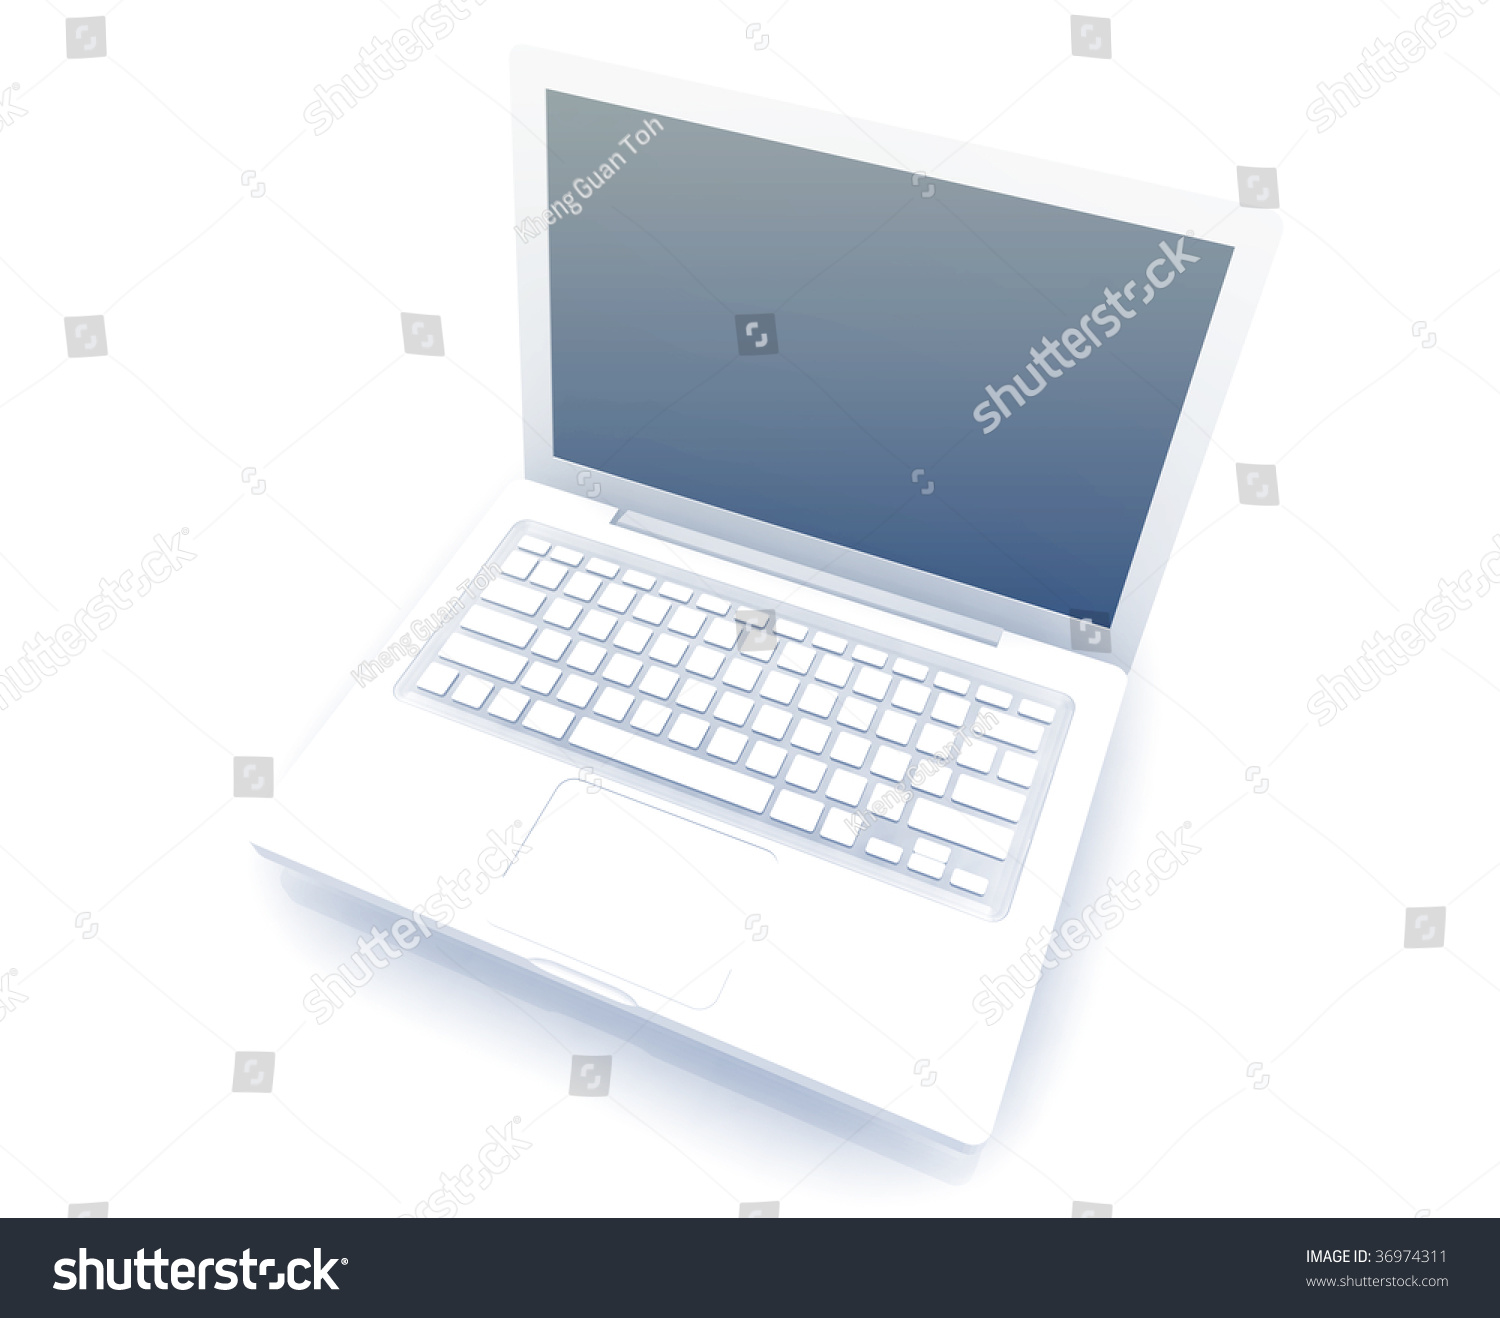 Notebook laptop computer illustration glossy metal style isolated #36974311